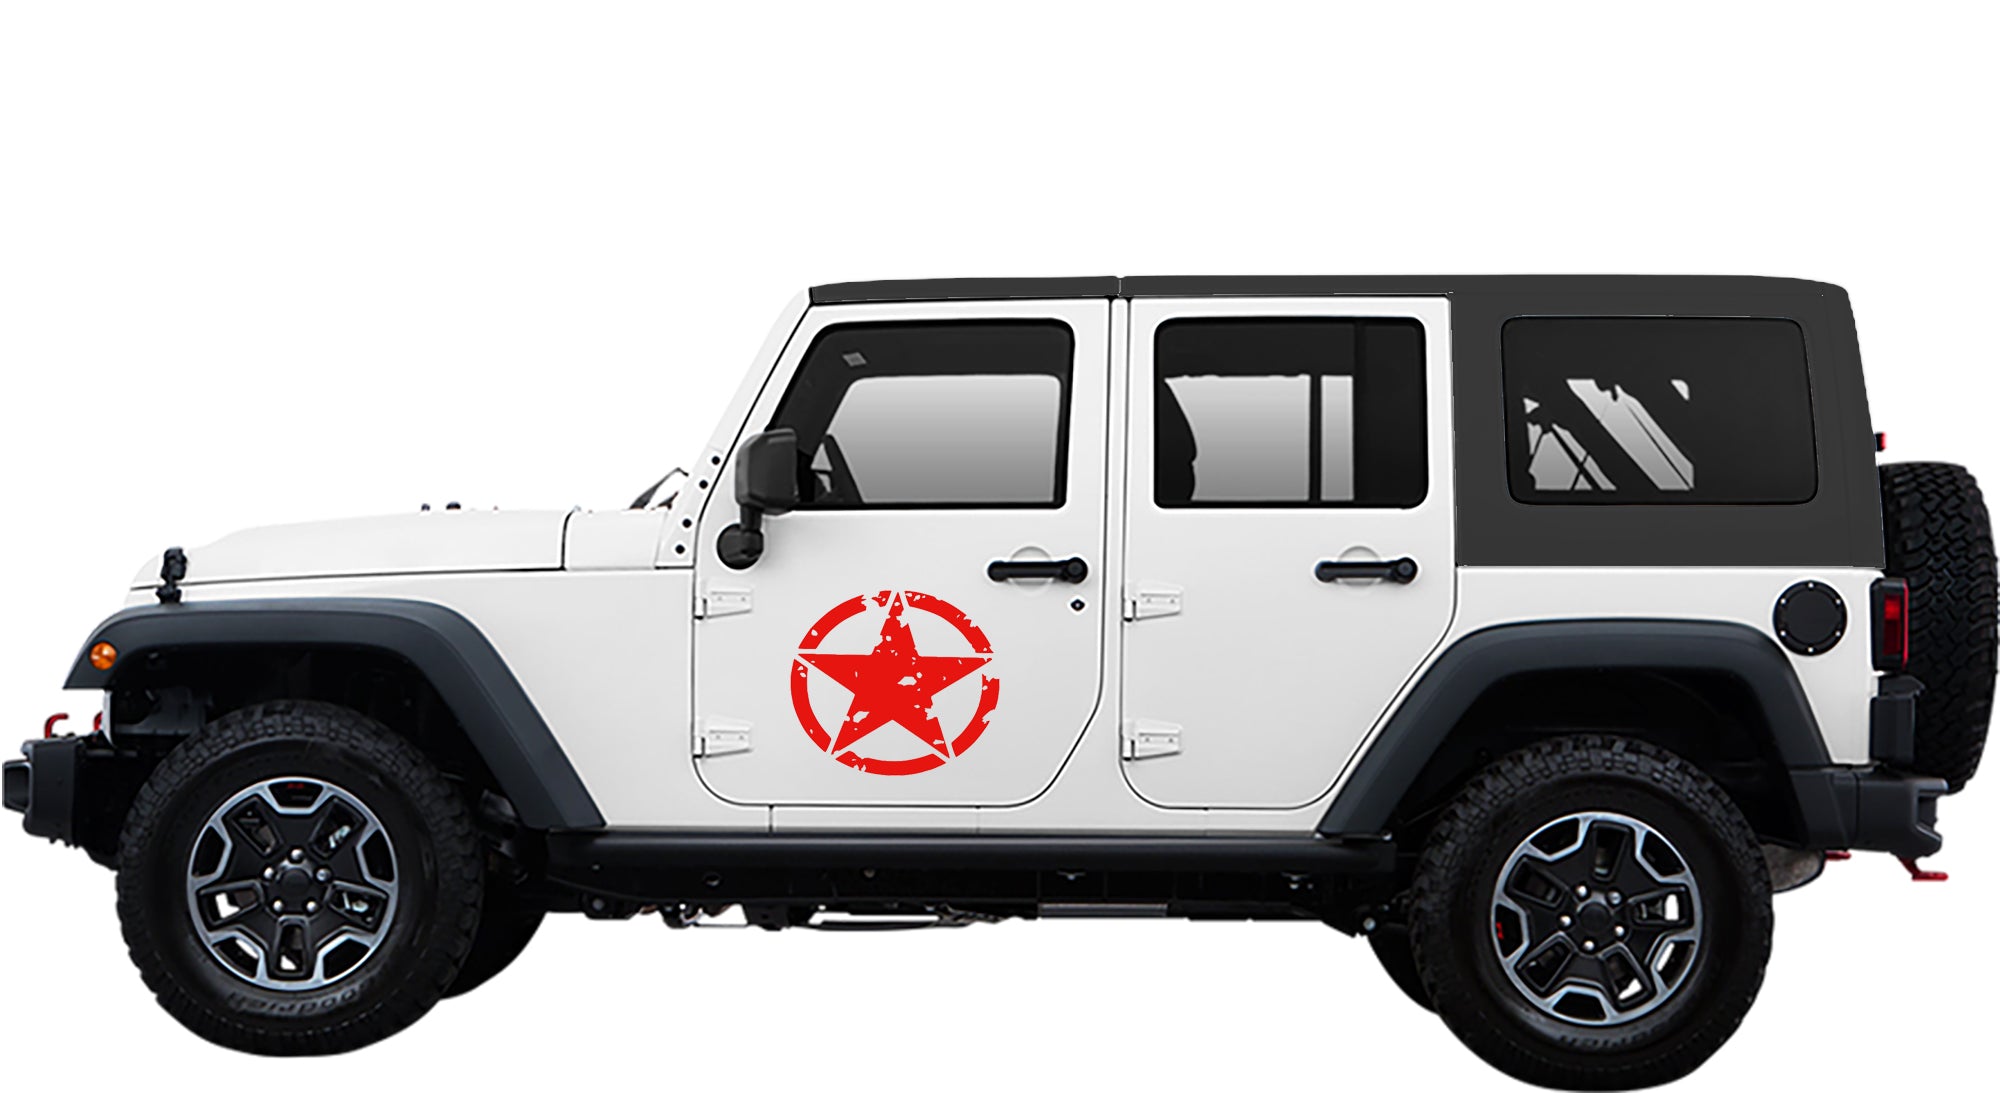 Jeep Wrangler JK Army Star Side Decals (Pair) : Vinyl Graphics Kit fits (2007-2018)